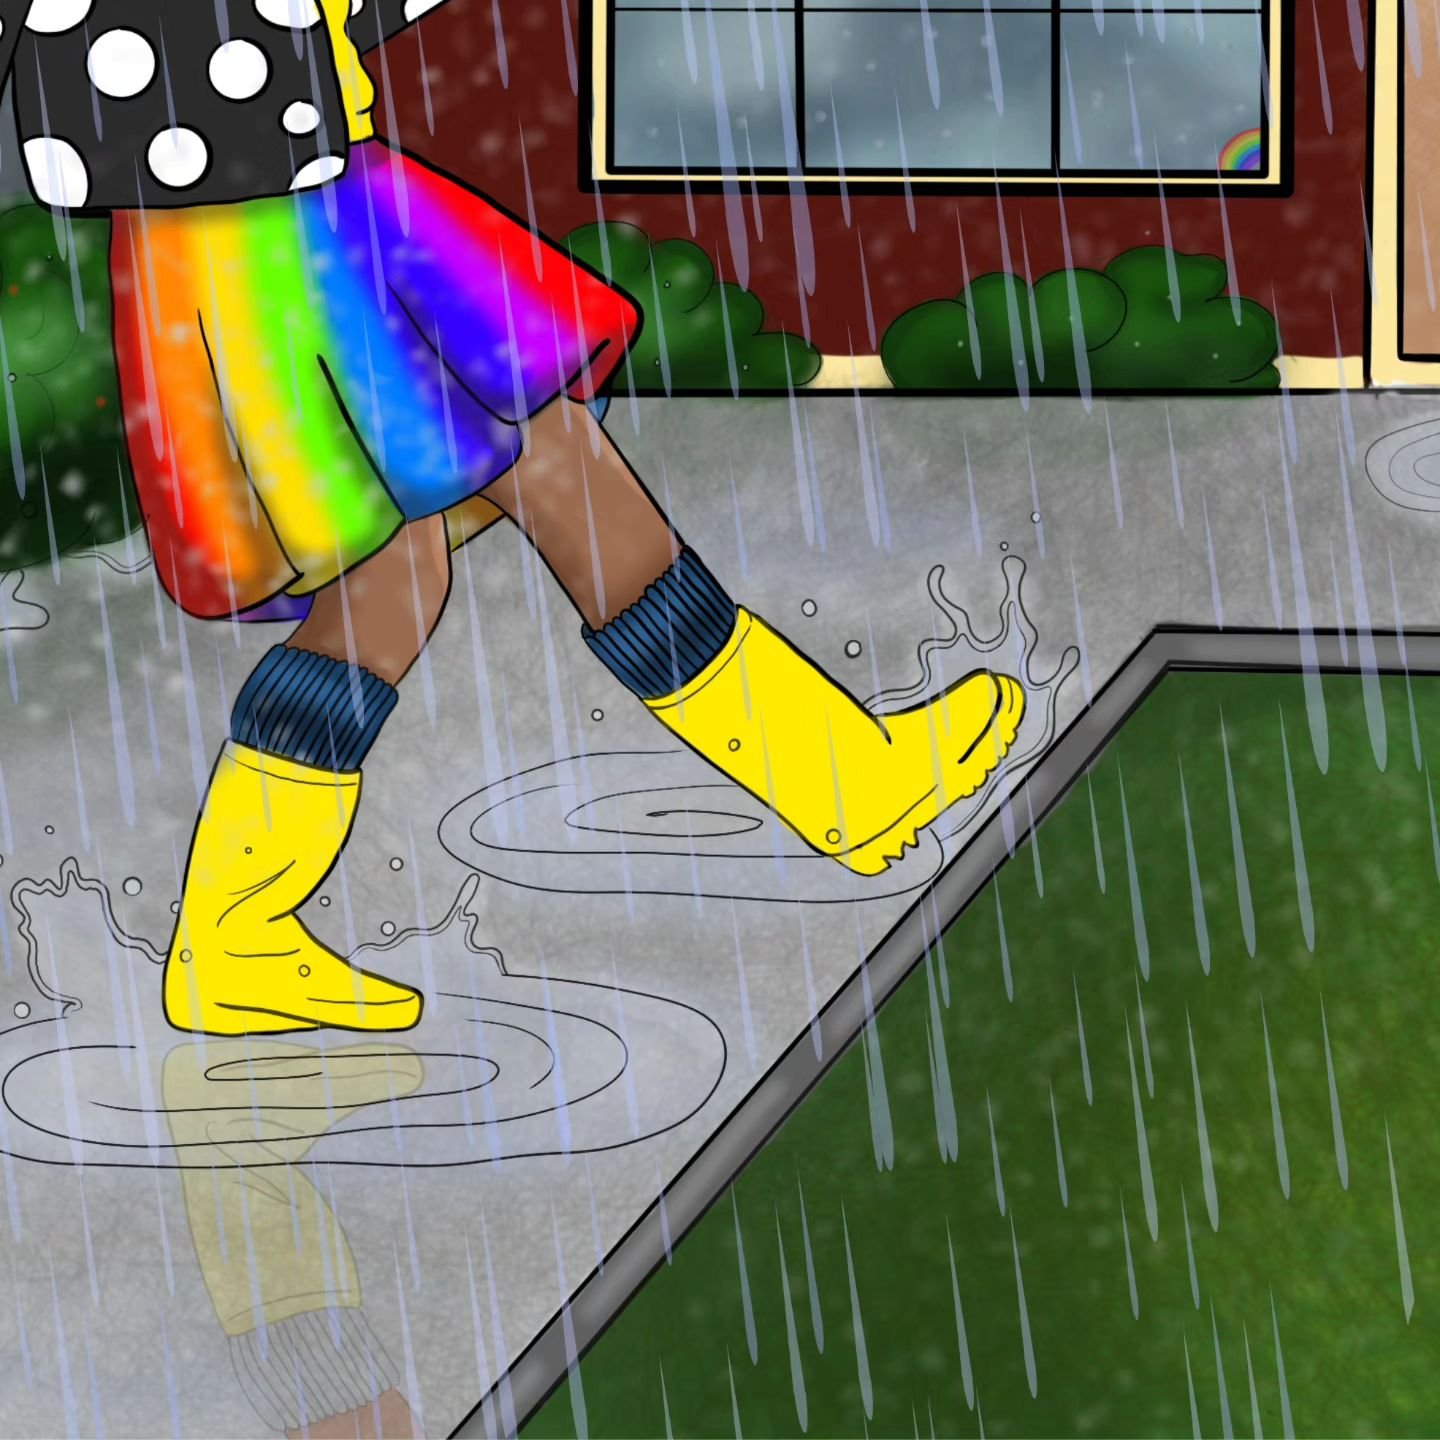 Today's weather had me feeling down, but then I thought of my OC Solana and her positive outlook on life. Despite the storms, she always manages to find rainbows and bring light to the world. So, instead of focusing on the rain, I'm going to channel 